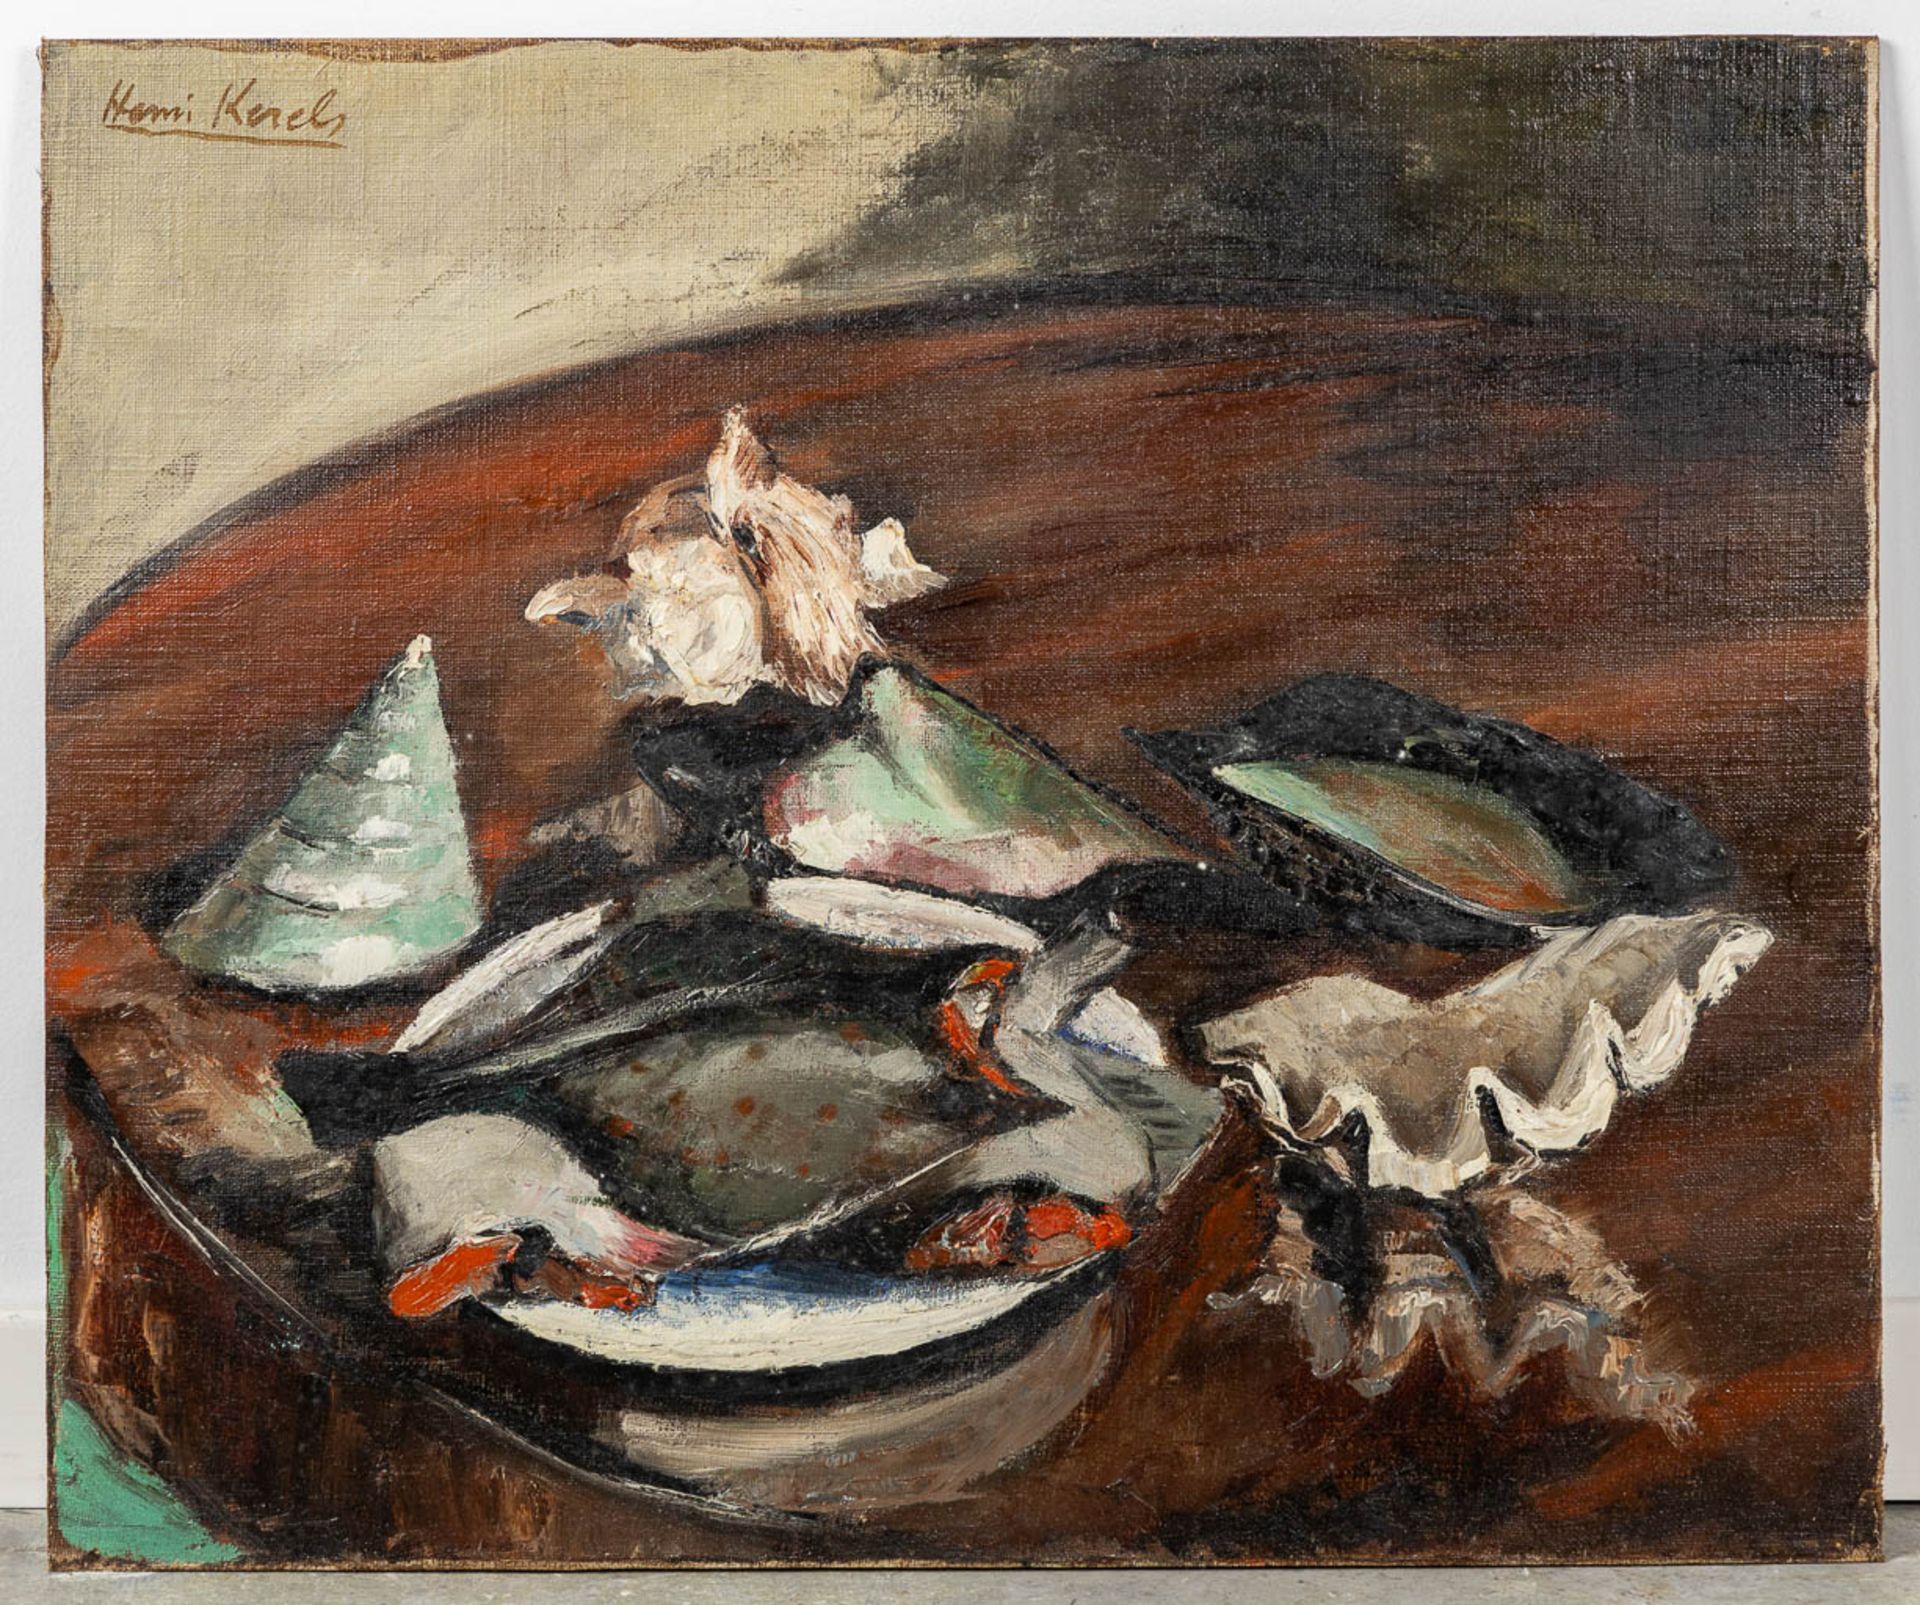 Henri KERELS (1896-1956) 'Still life with Mussles and Flatfish' oil on canvas. (W:60 x H:50 cm) - Image 3 of 6